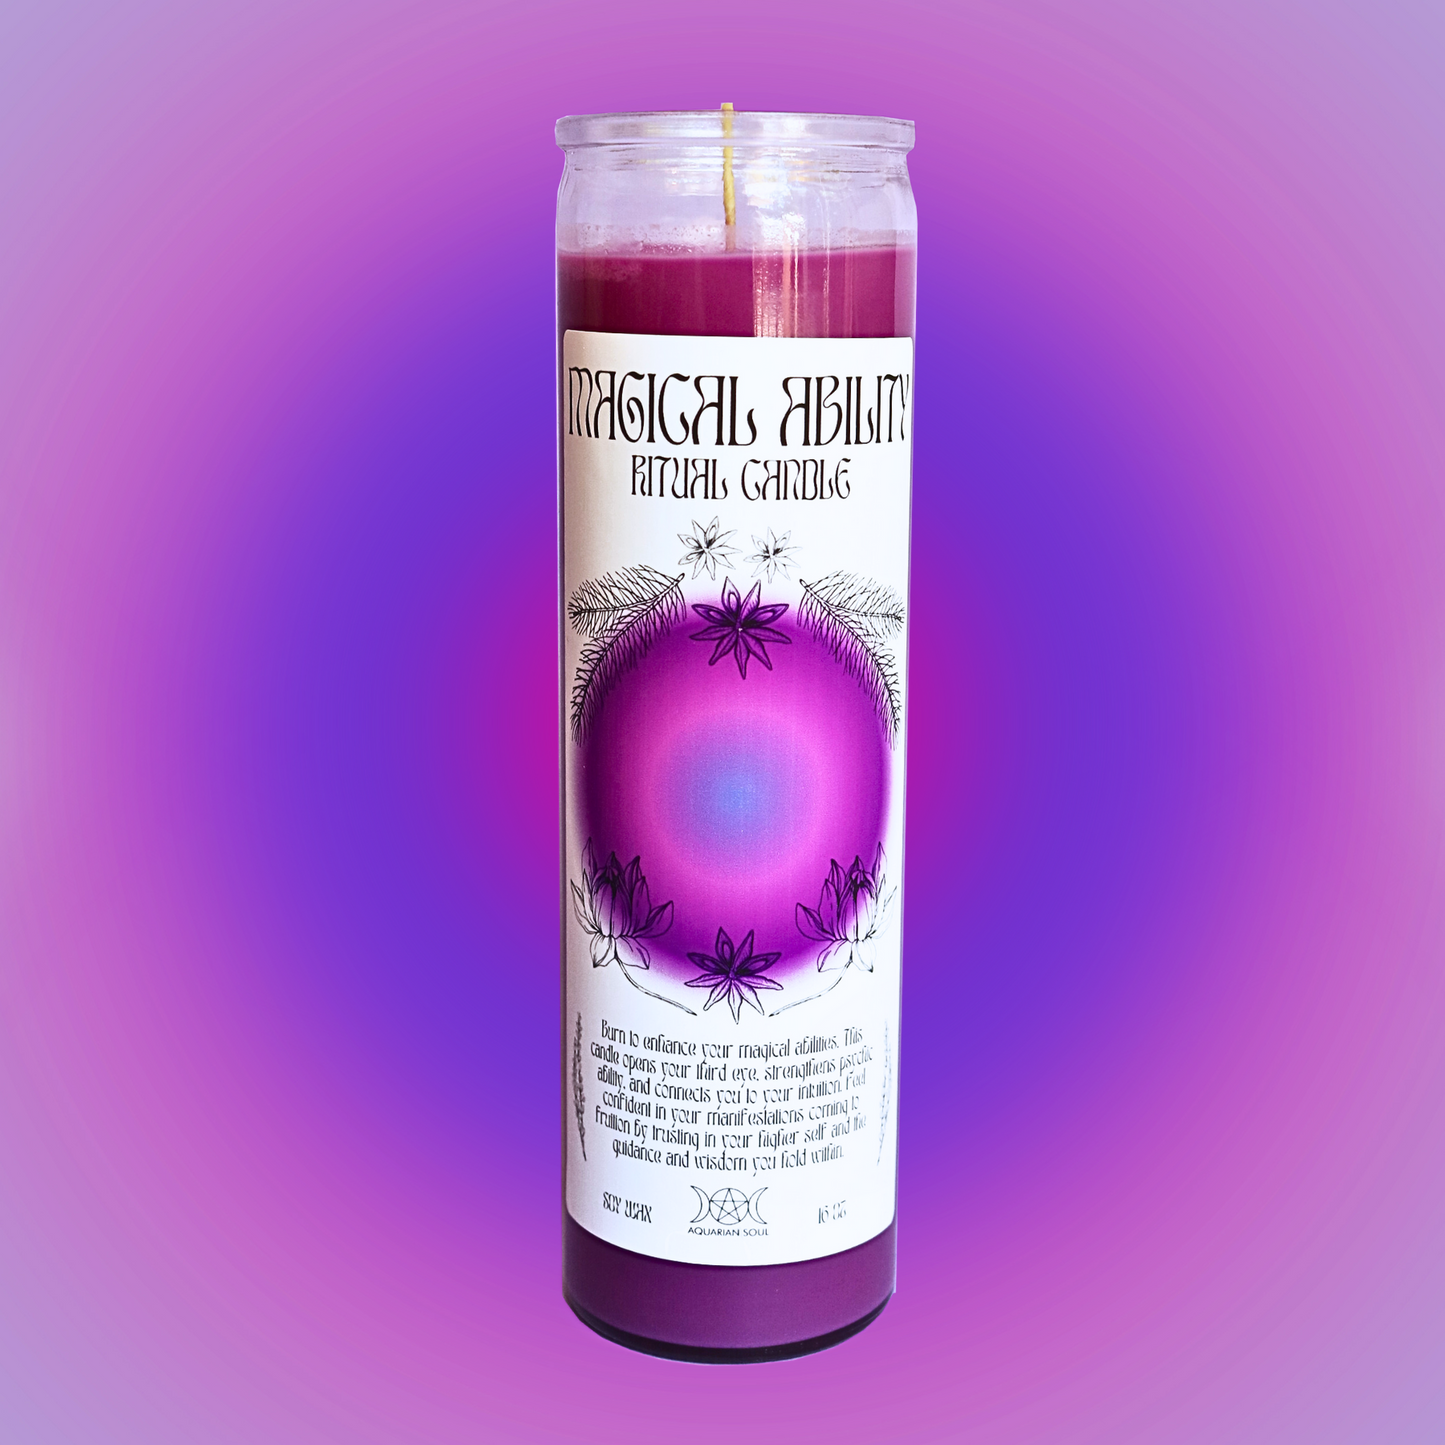 Magical Ability 7 Day Ritual Candle